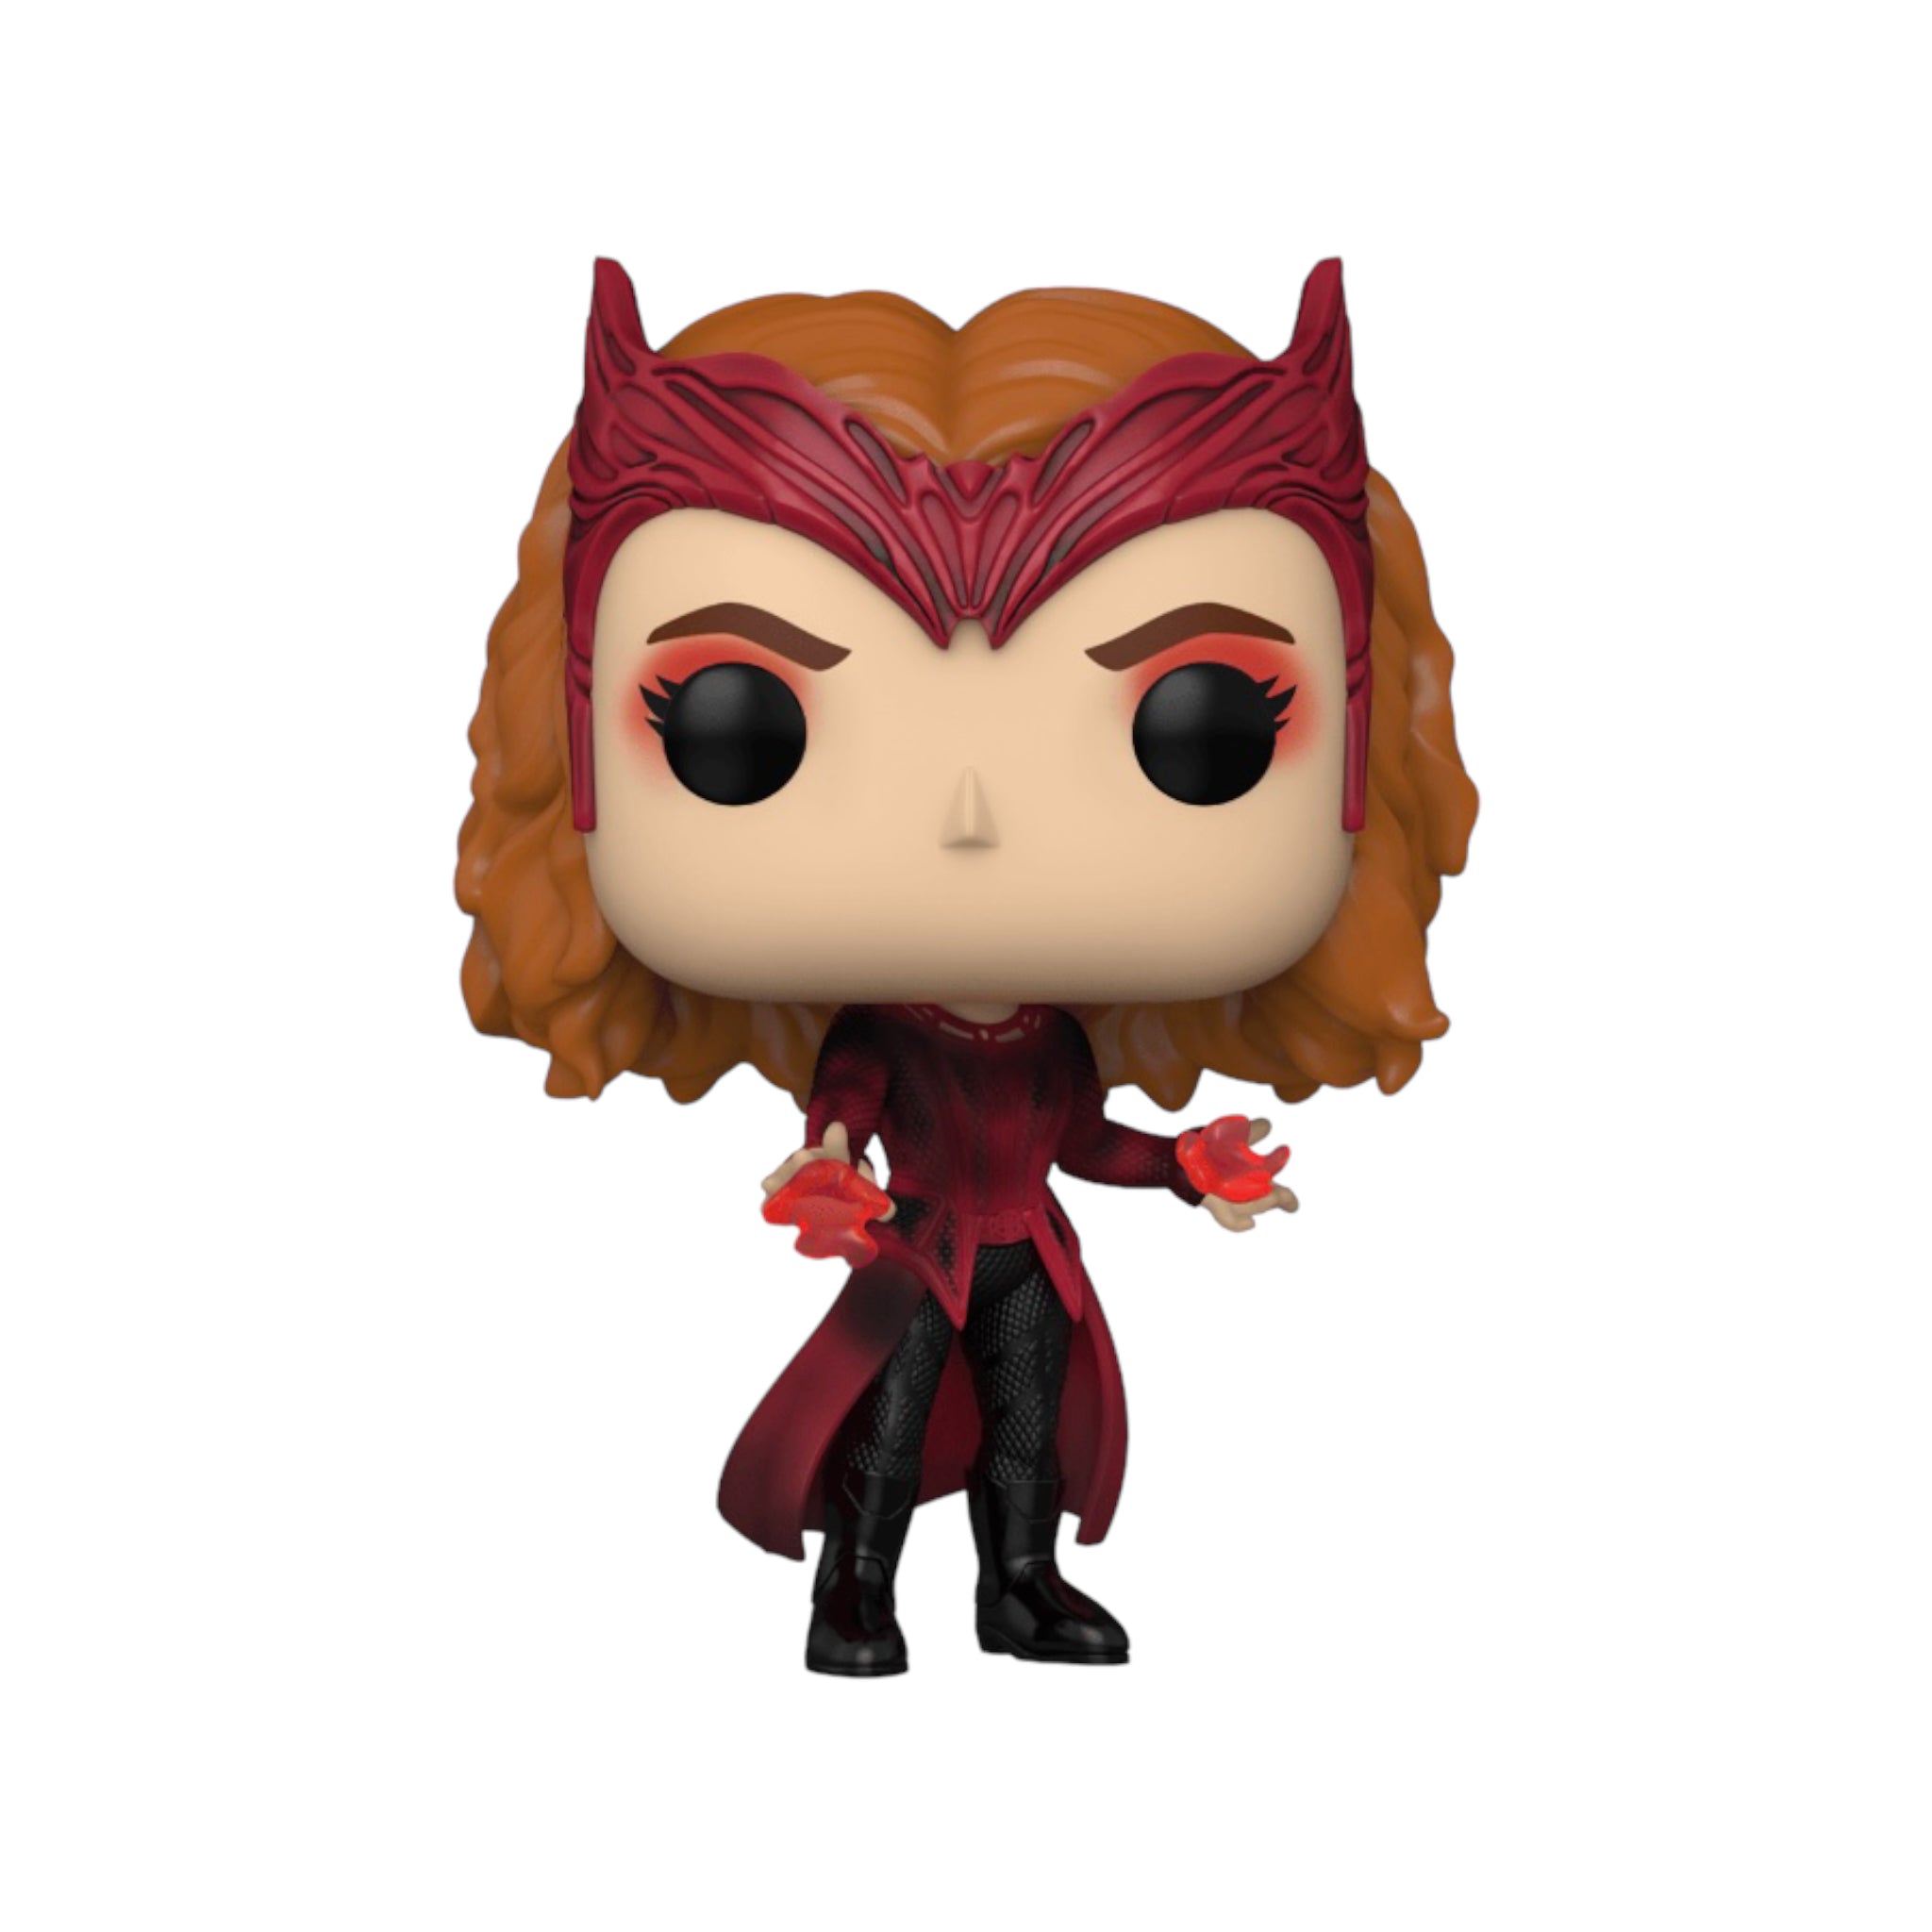 Scarlet Witch #1007 Funko Pop! - Doctor Strange in The Multiverse of Madness